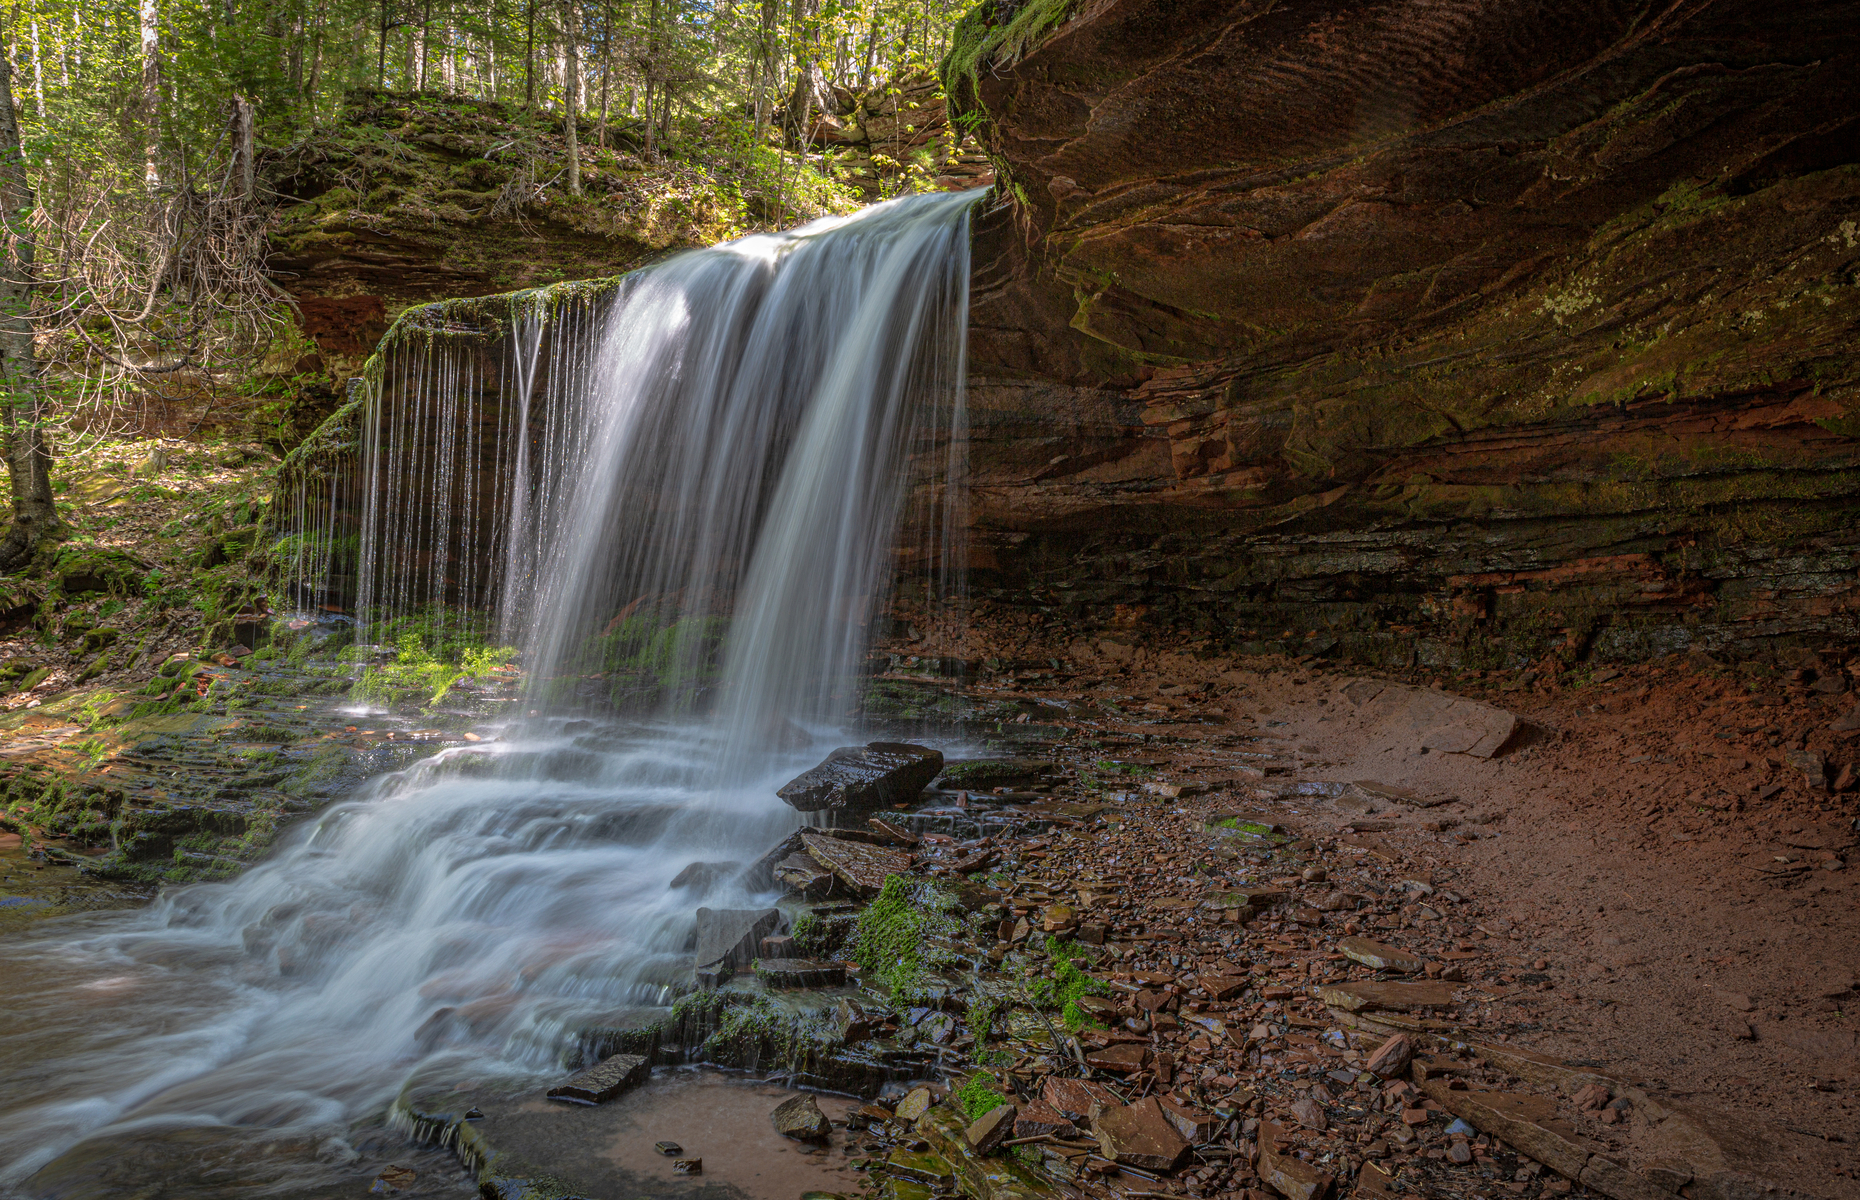 <p class="p1"><span>Those who are adventurous enough to travel off the beaten path to find this secluded spot will be rewarded with one of the most peaceful waterfalls in the entire country (be sure to get a picture standing between the rocks and the rushing water). <a href="https://www.travelwisconsin.com/natural-attractions-and-parks/lost-creek-falls-254404" rel="noreferrer noopener"><span>Lost Creek Falls</span></a> is located near Cornucopia on the Bayfield peninsula. </span></p>